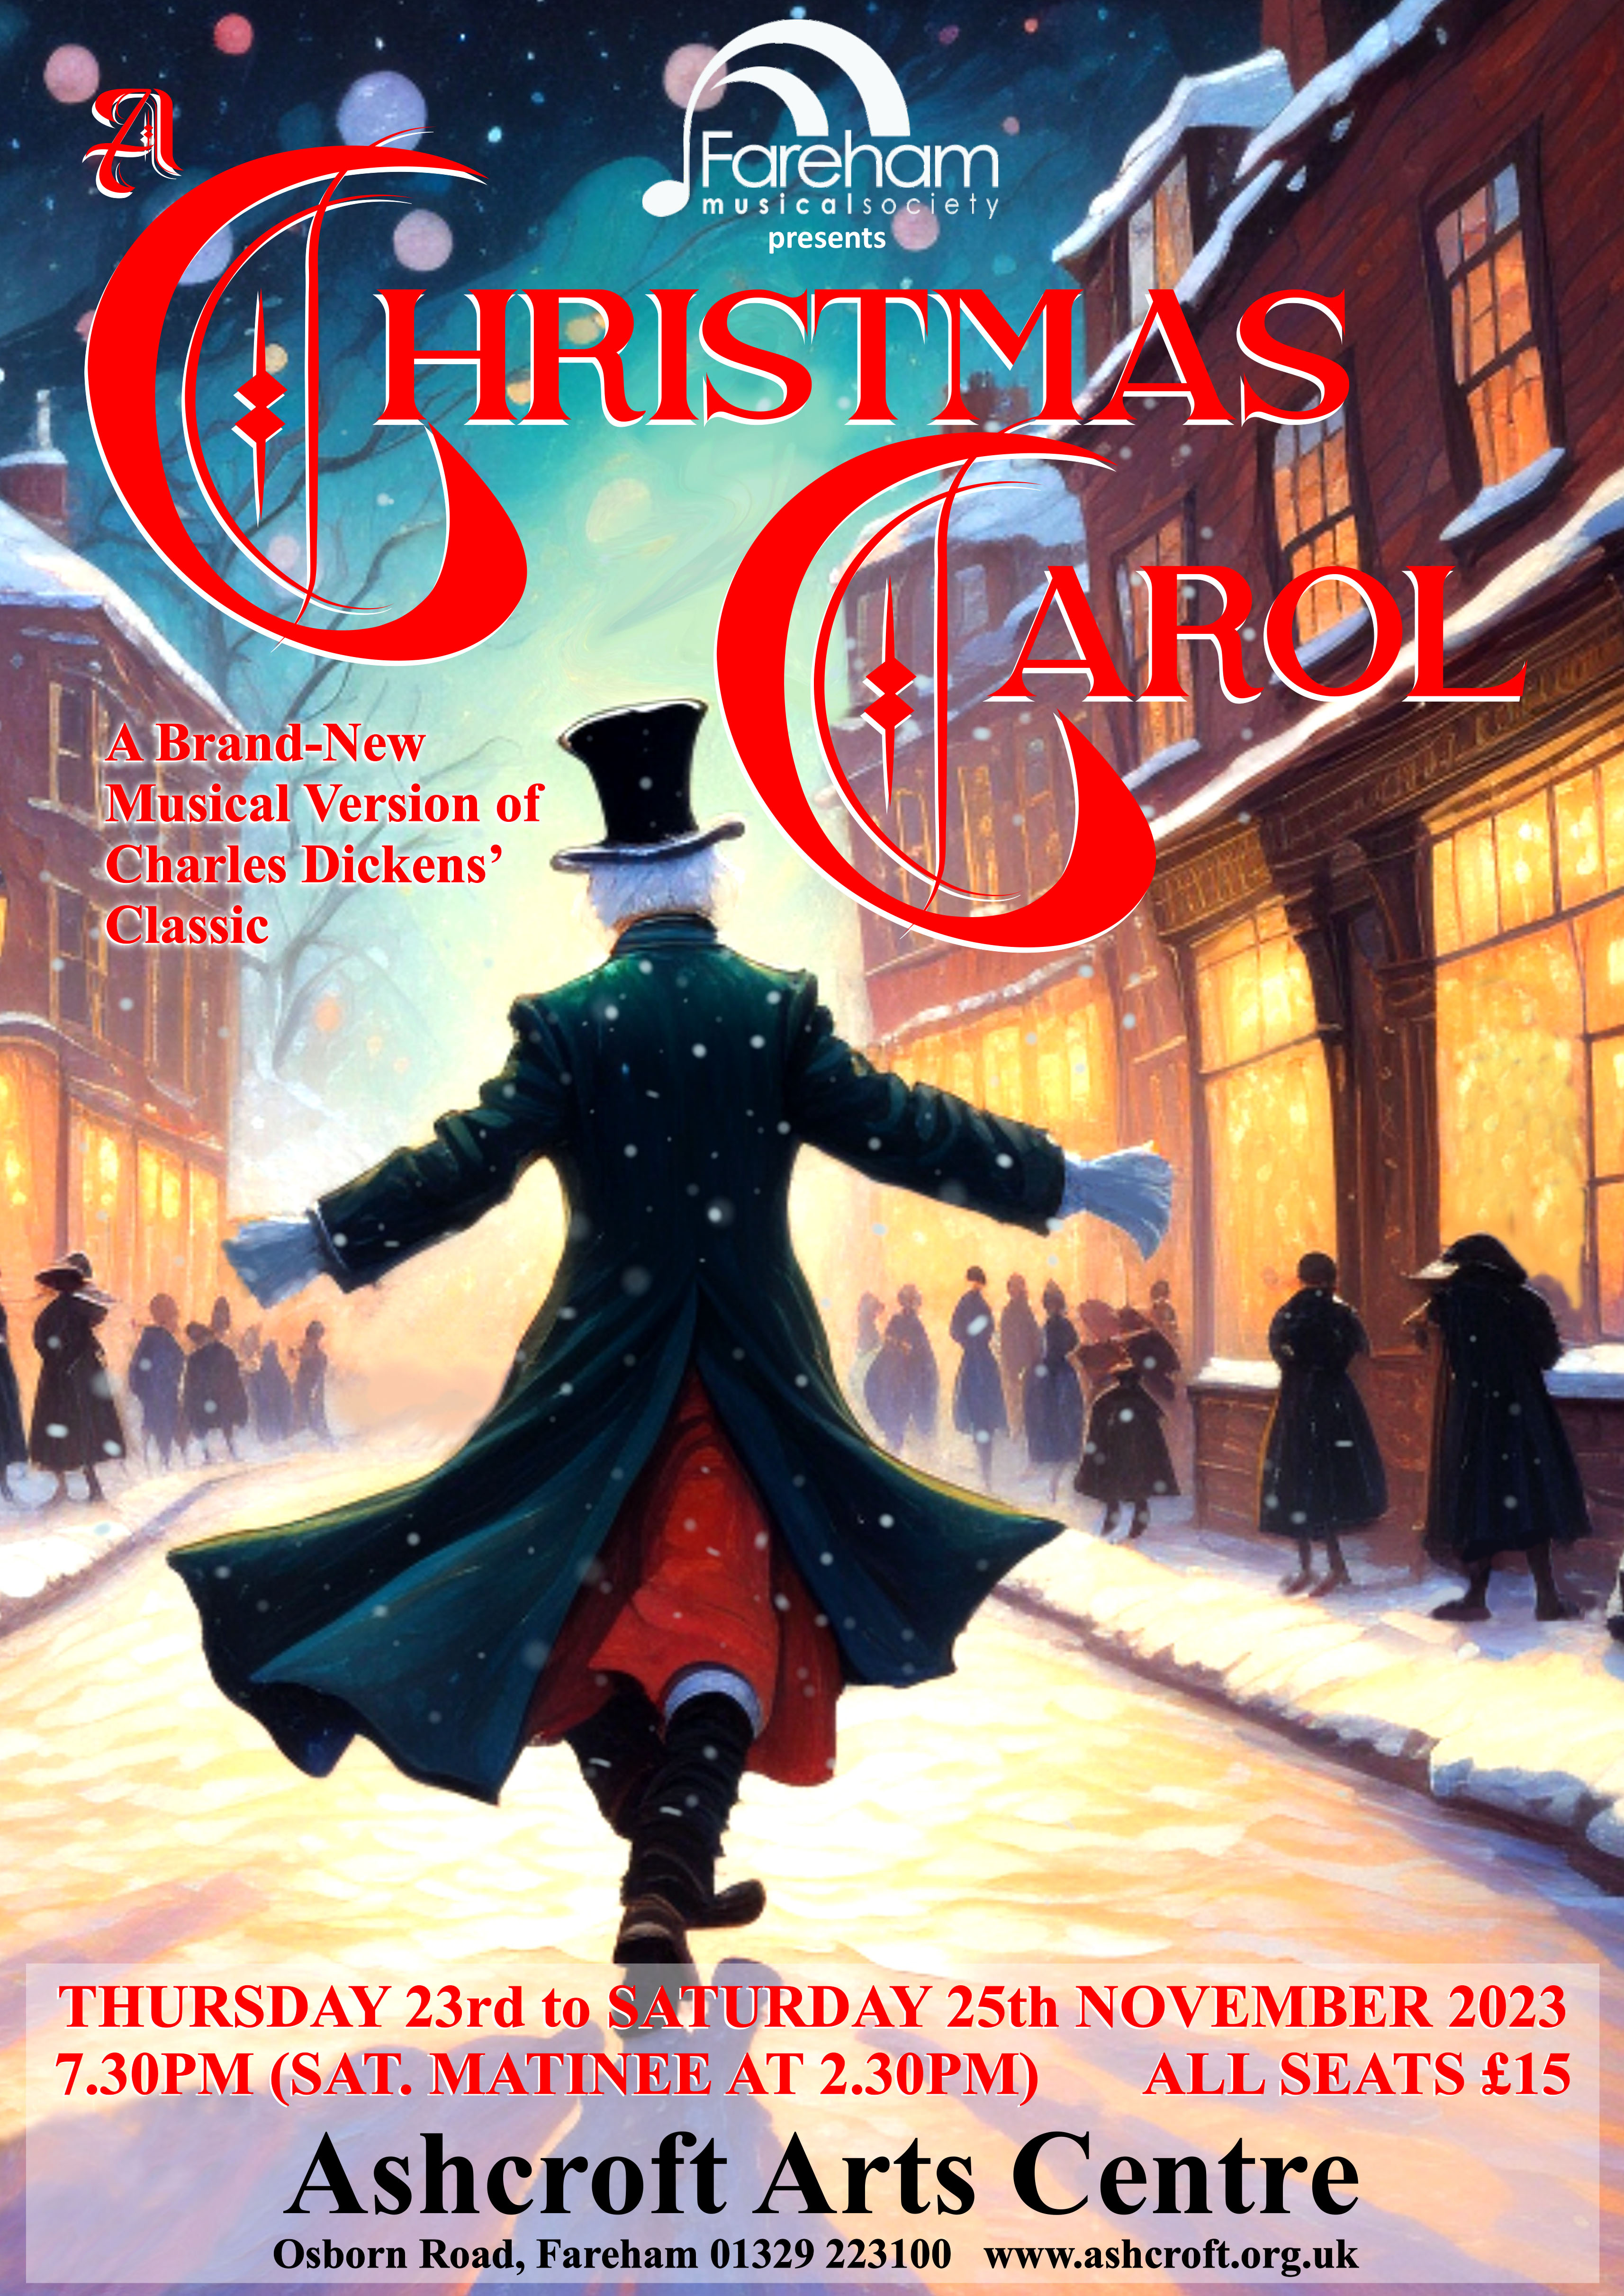 A poster showing Ebenezer Scrooge in A Christmas Carol